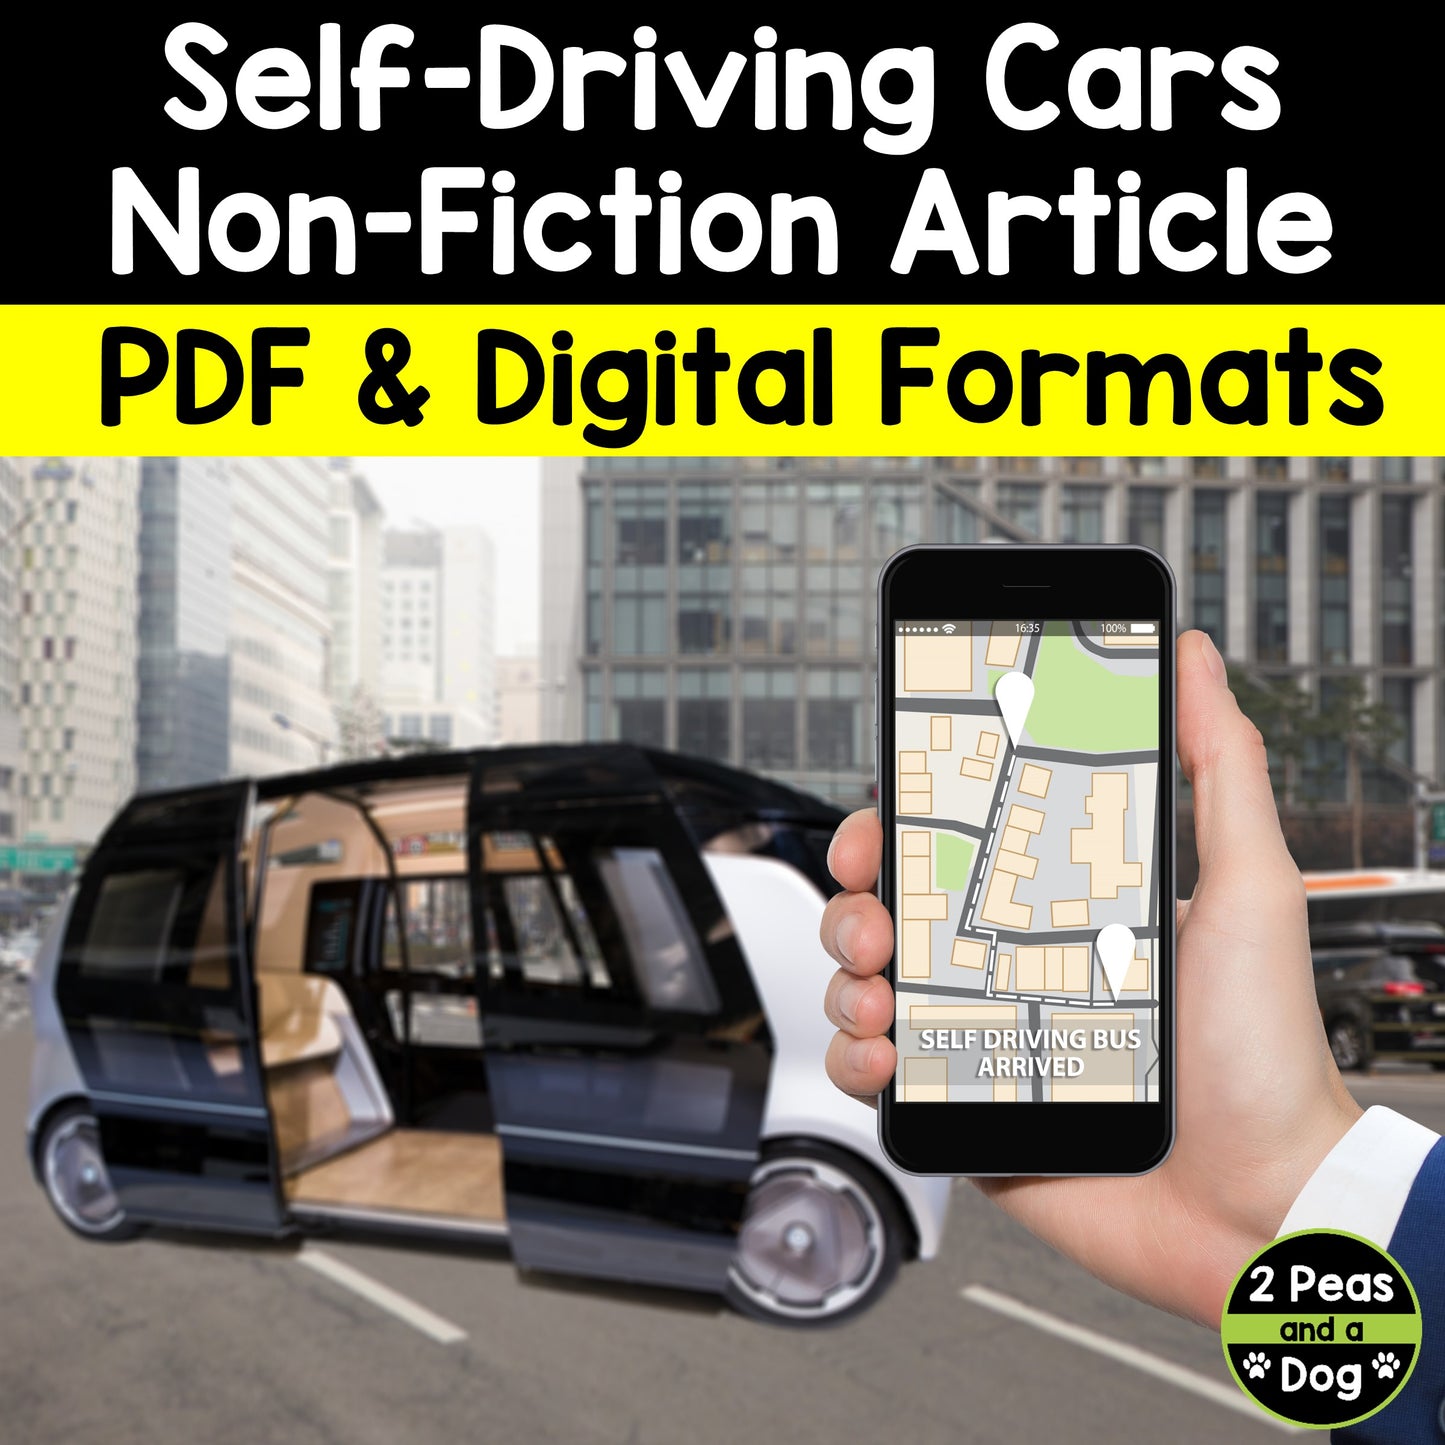 Self-Driving Cars Non-Fiction Article